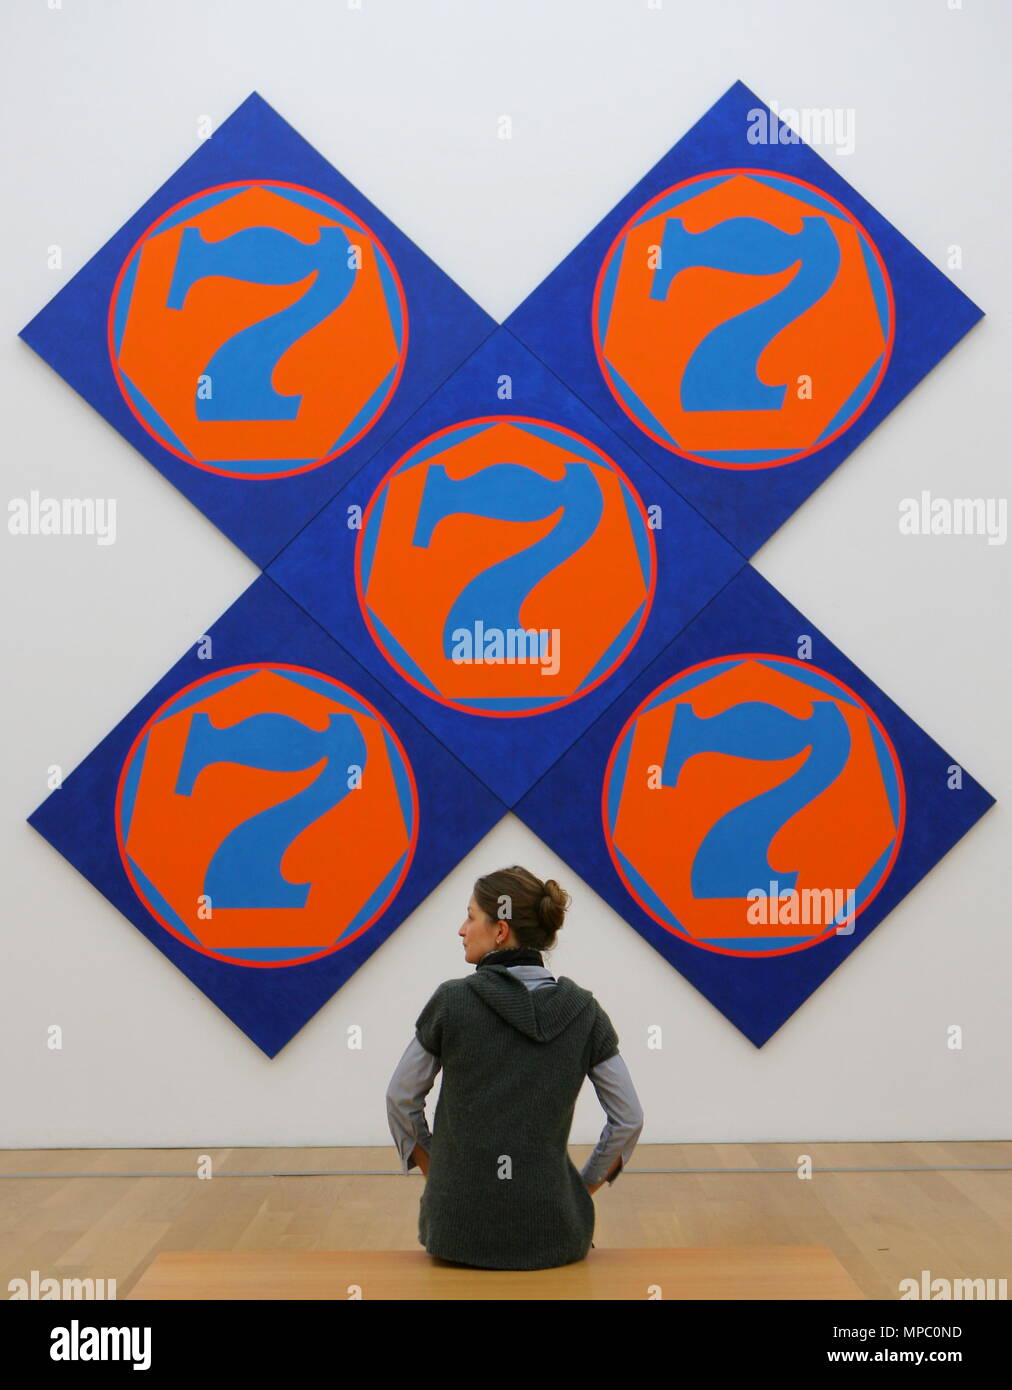 Wiesbaden, Germany. 18th Jan, 2008. A woman eyes the paintin 'The X-7' (1998) by US pop artist Robert Indiana in Wiesbaden, Germany, 18 January 2008. For the first time, the series 'Numbers' is exhibited in Europe. From 22 January through 18 May the museum puts paintings, graphics and sculptures on display in the exhibition 'Robert Indiana - The American Painter of Signs'. Credit: ARNE DEDERT | usage worldwide/dpa/Alamy Live News Stock Photo